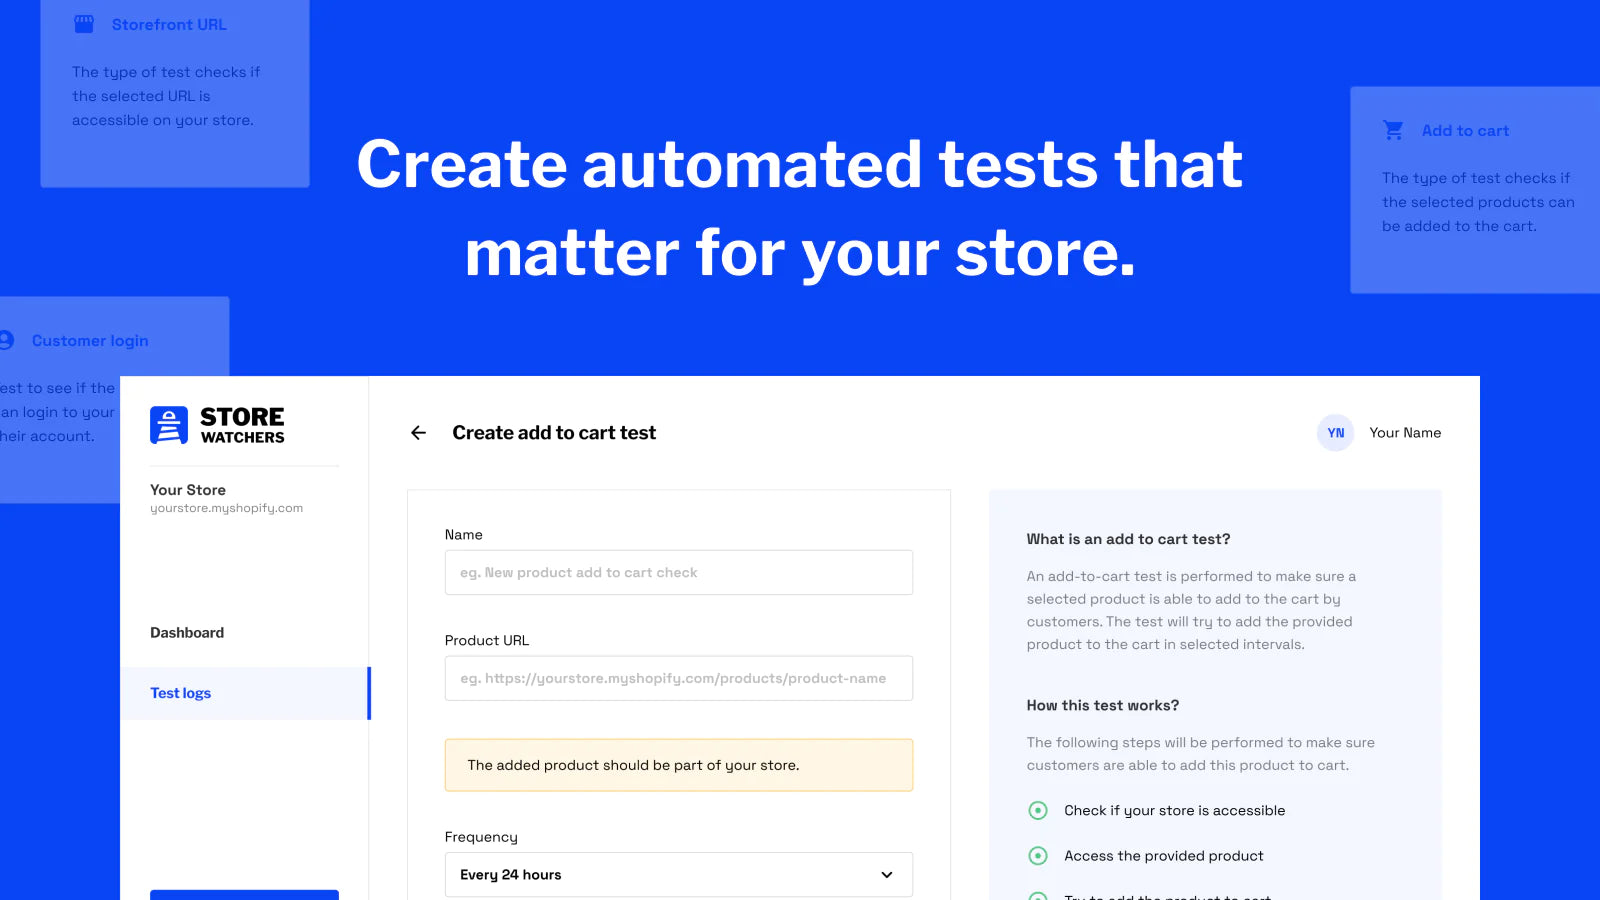 reporting monitoring automated tests customer login search add-to-cart test logs detailed test 